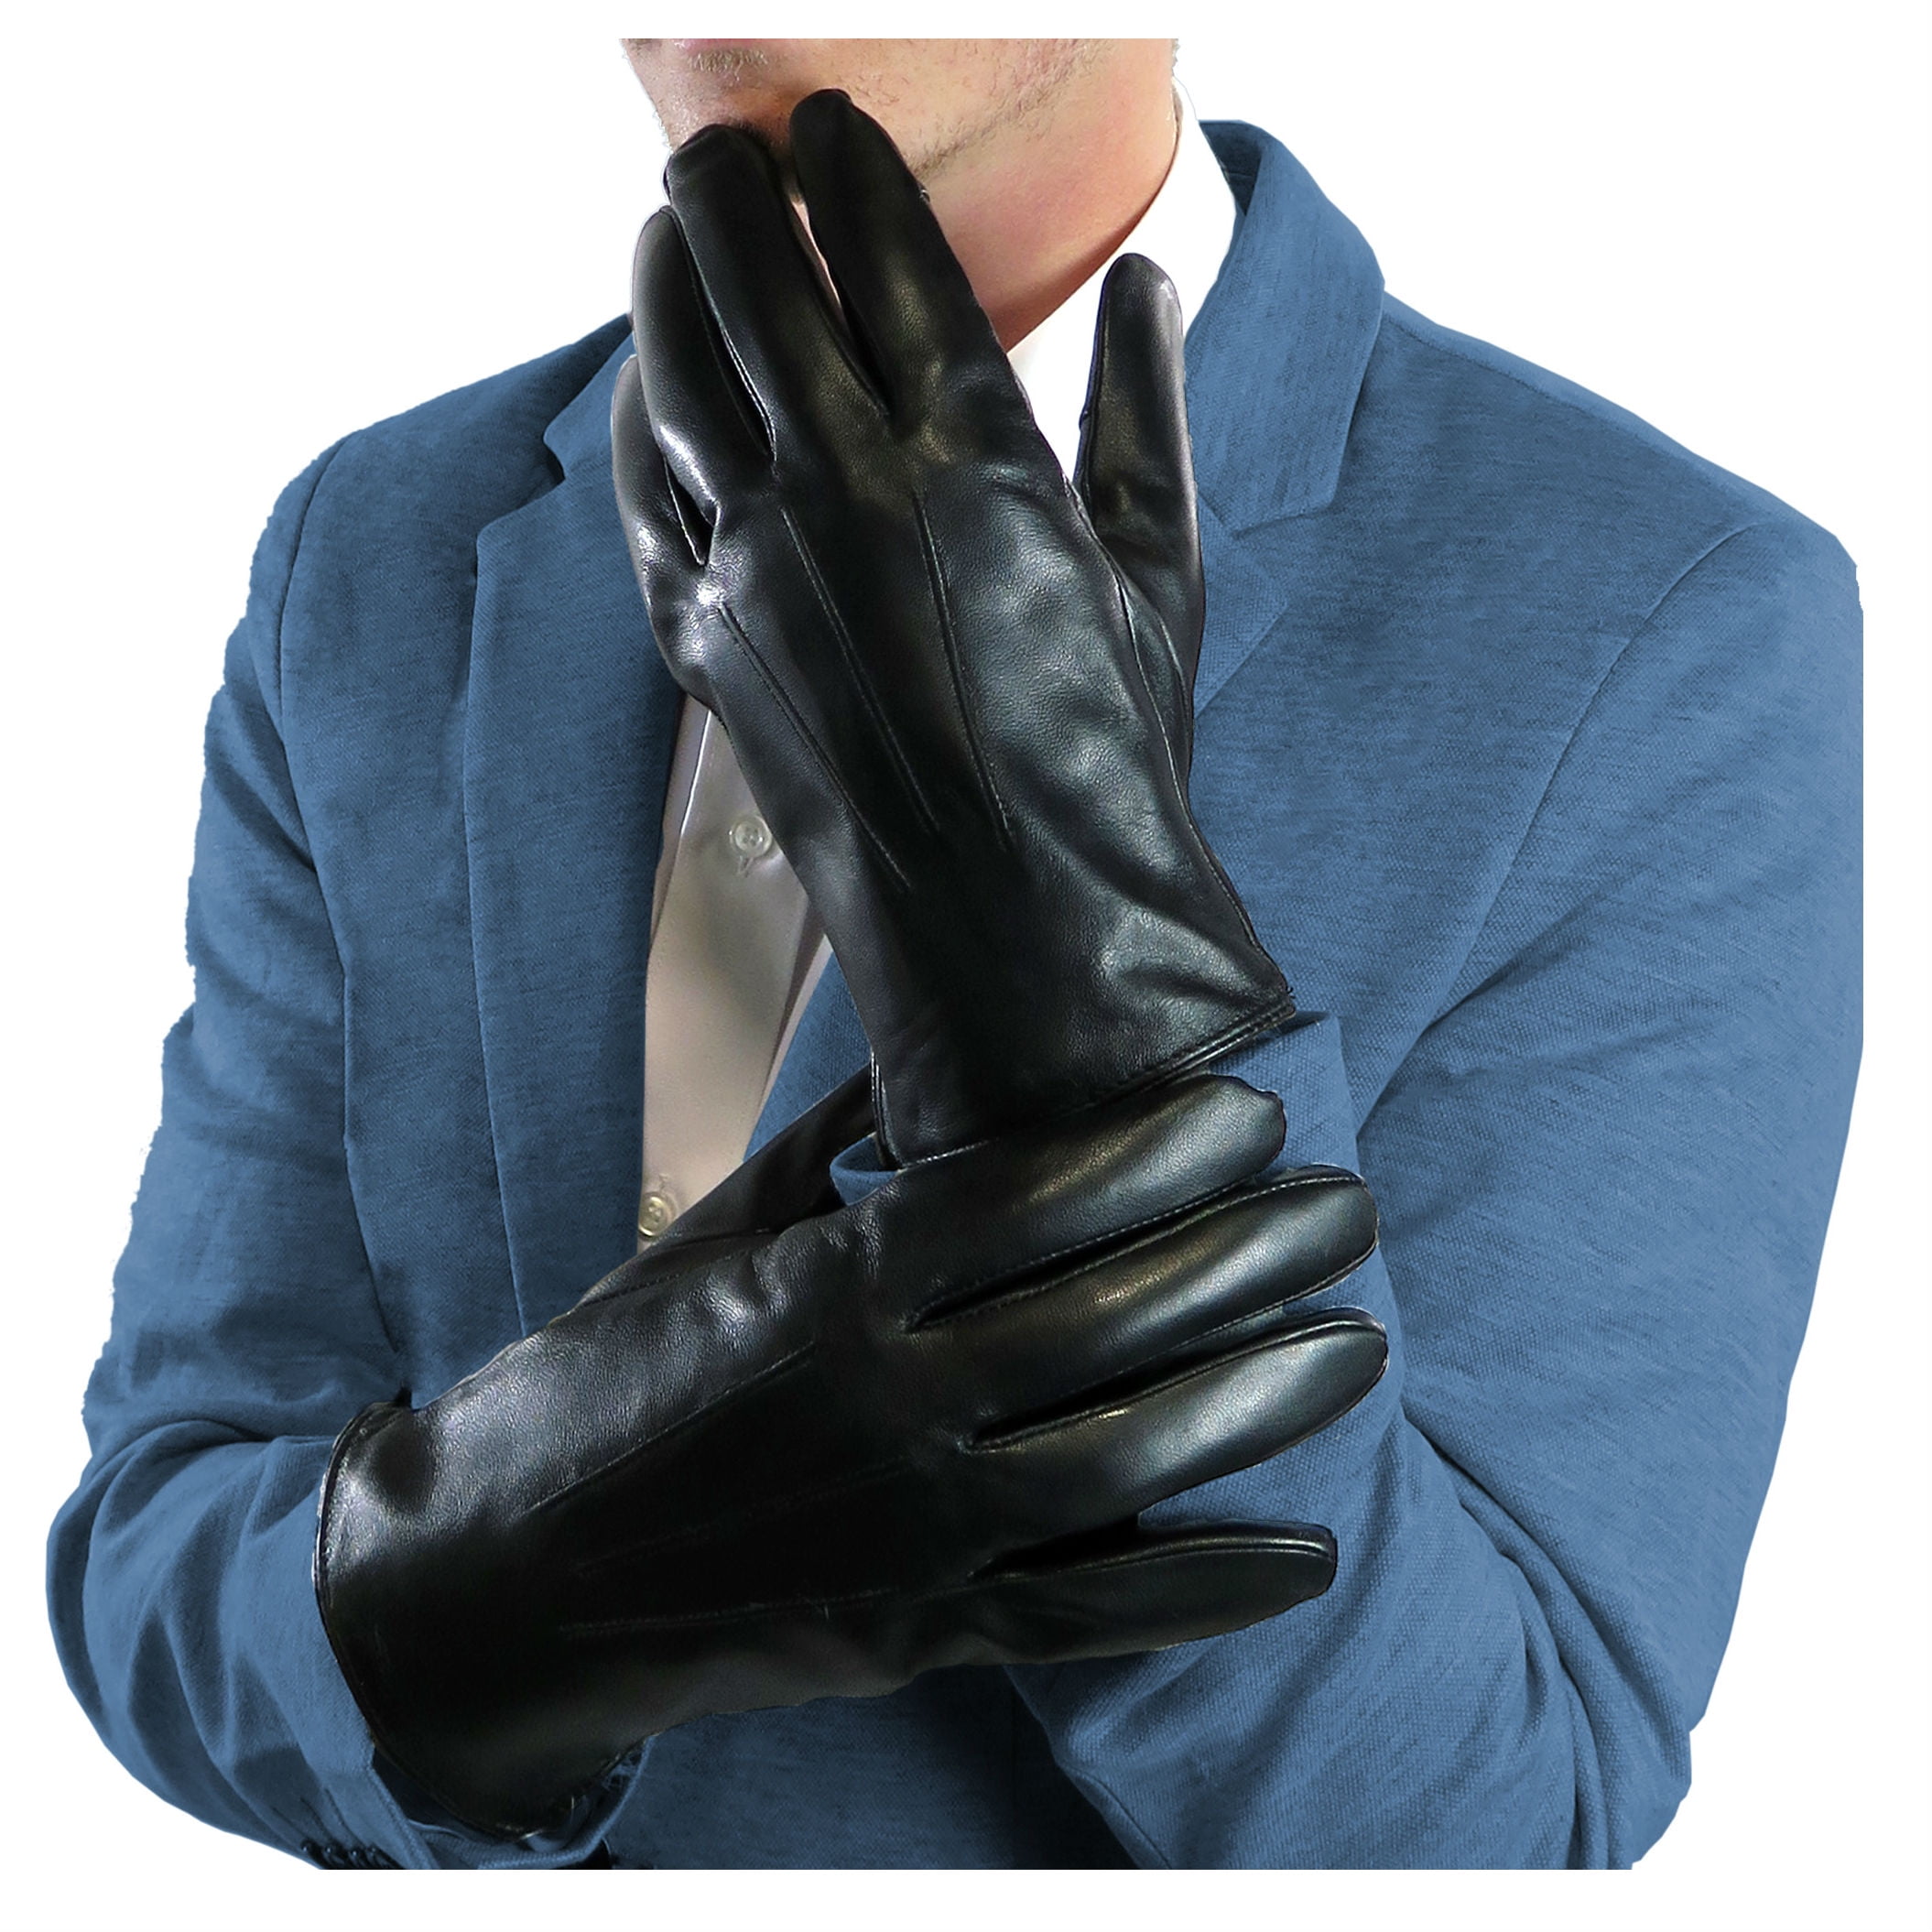 Mens Black 100% Real Leather Winter Thinsulate Thermal Warm Driving Gloves 